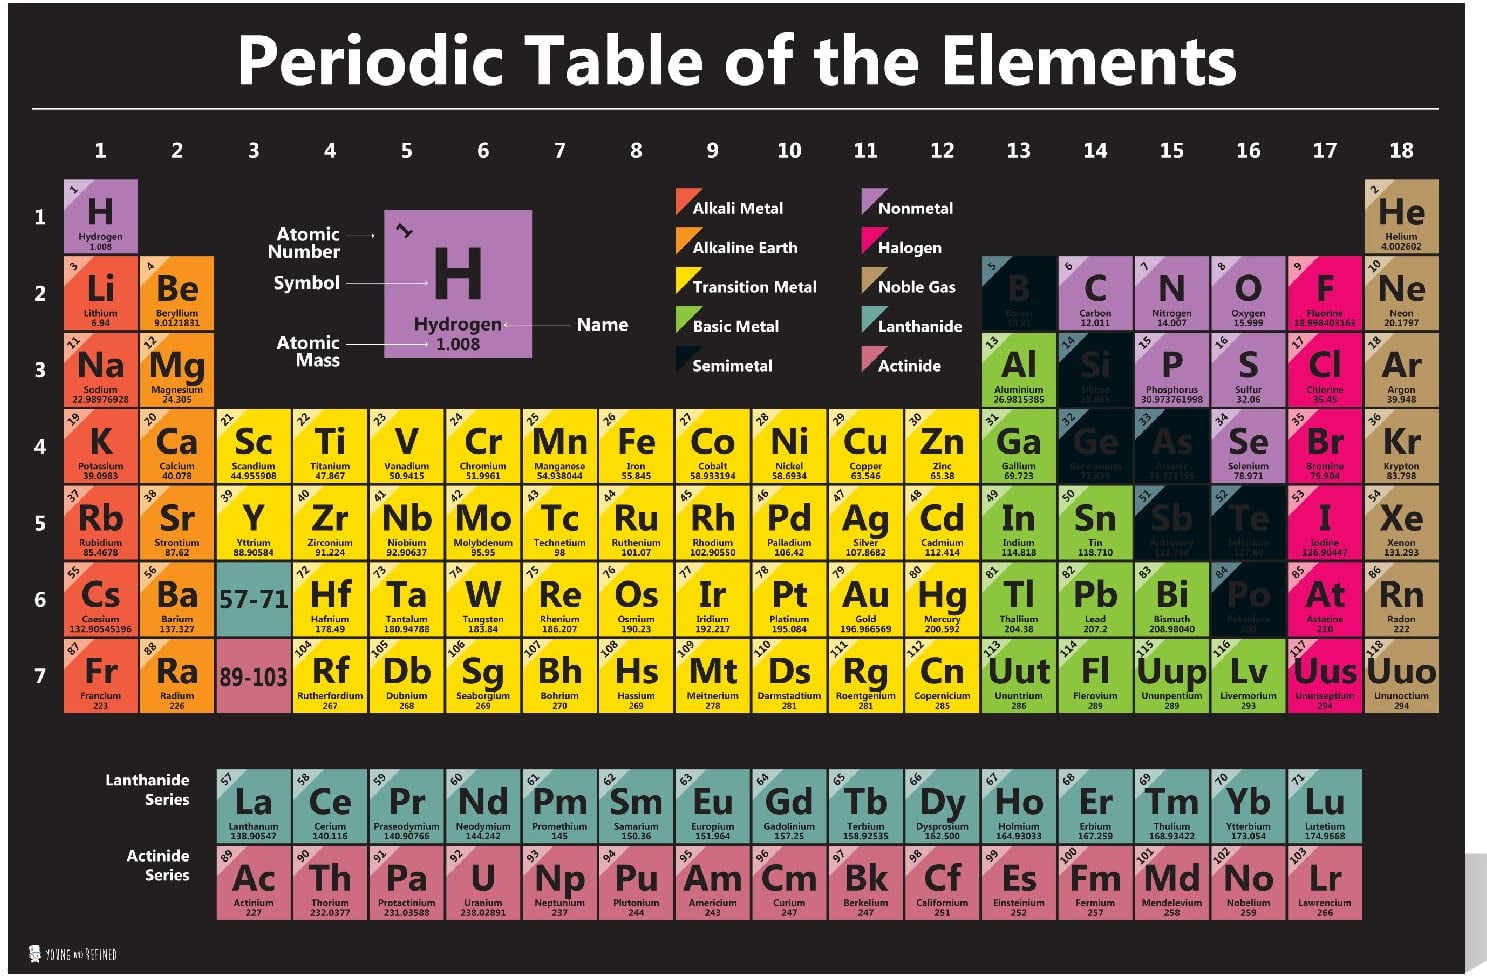 Atomic element. Periodic Table of elements. Atomic numbers. Atomic nubmers. Periodic Table of Asset classes.